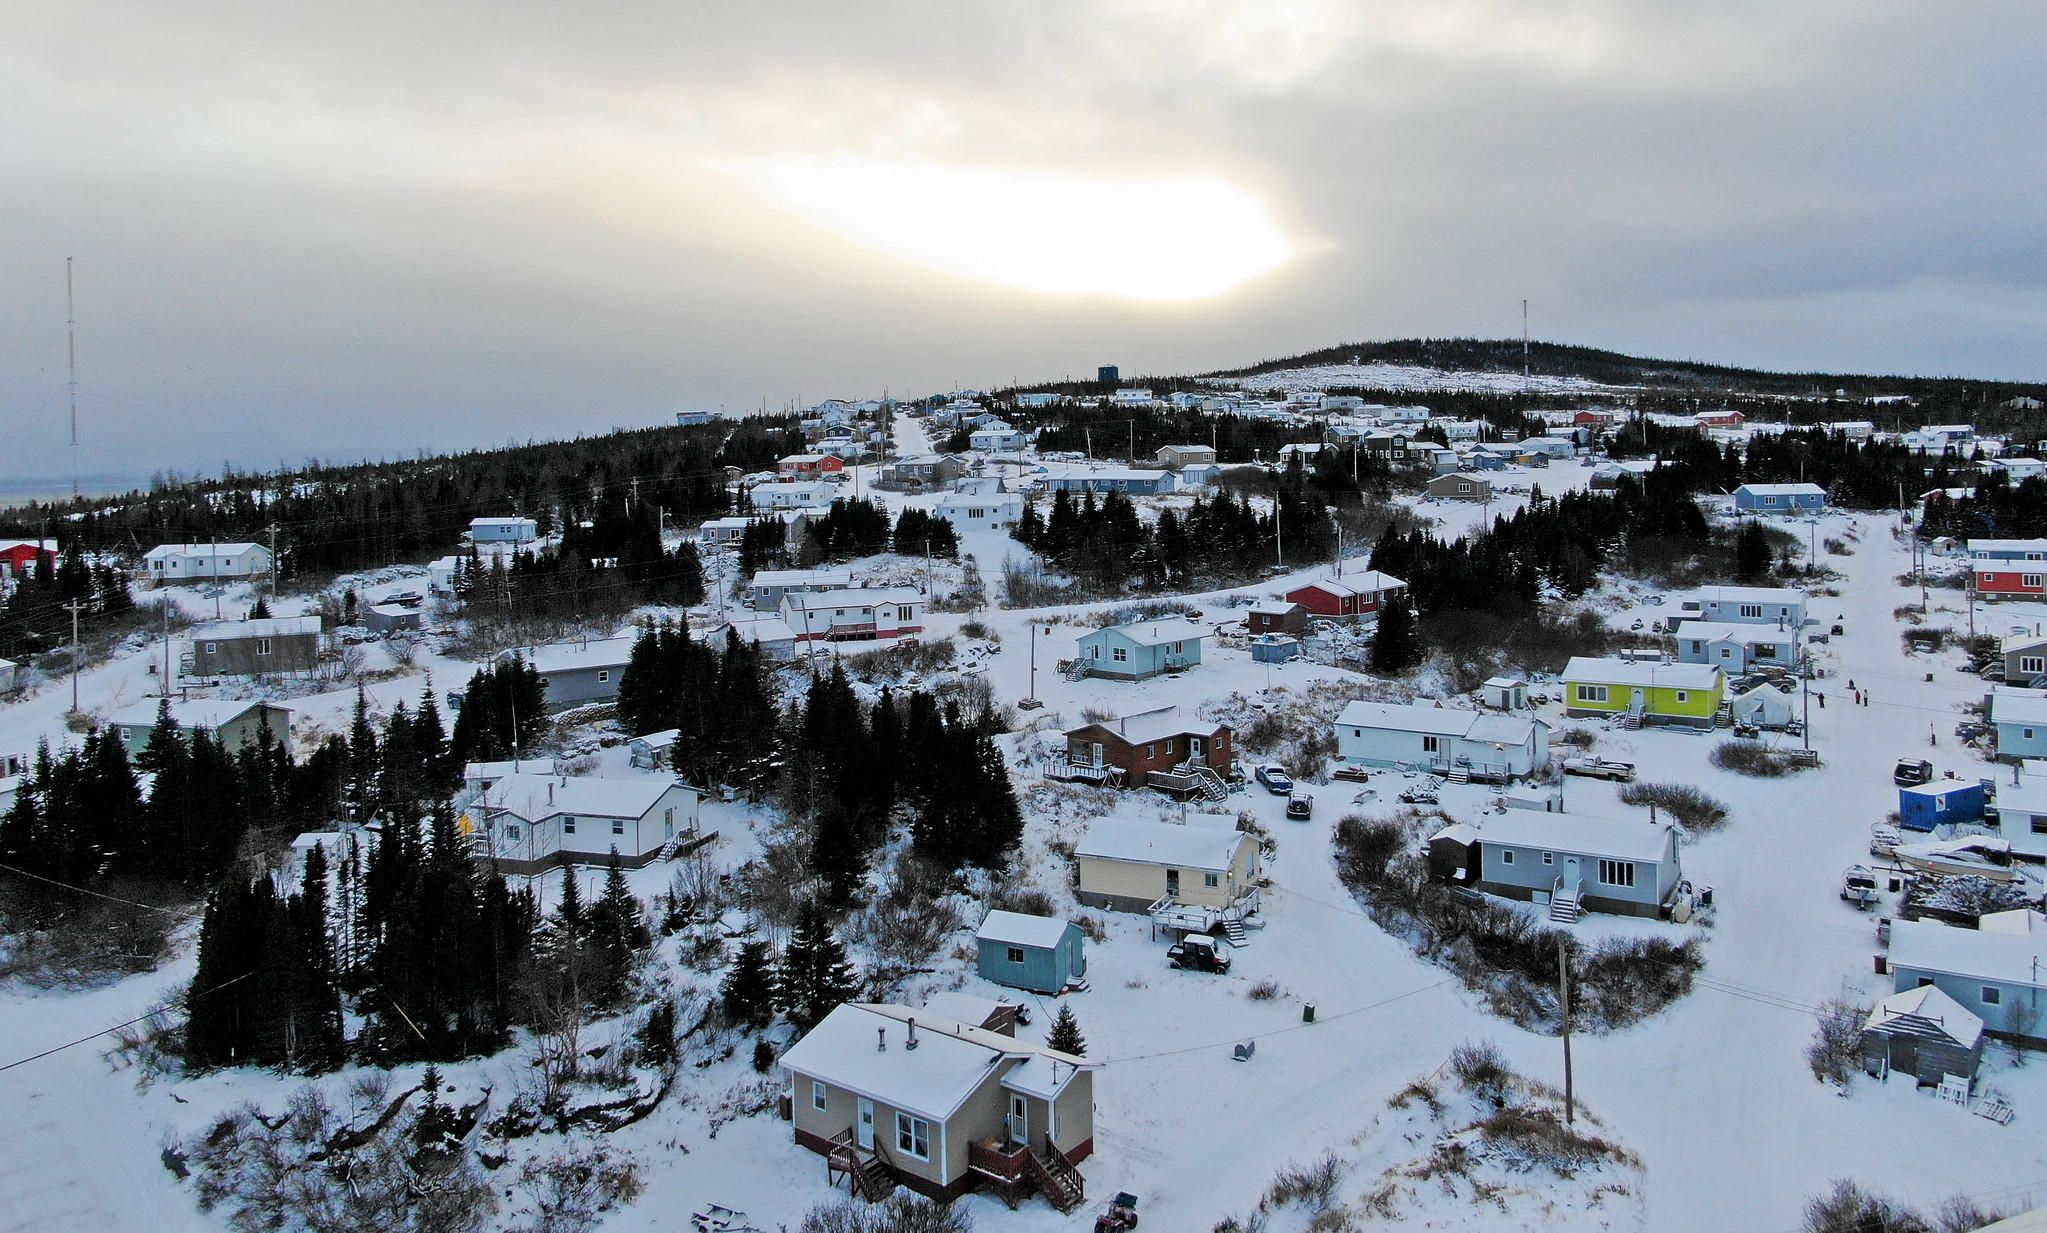 Rigolet, a town of about 350 people, is the southern most Inuit town in Labrador and sits about 90 miles from Happy Valley-Goose Bay, Labrador. Image by Michael Seamans. Canada, 2019.